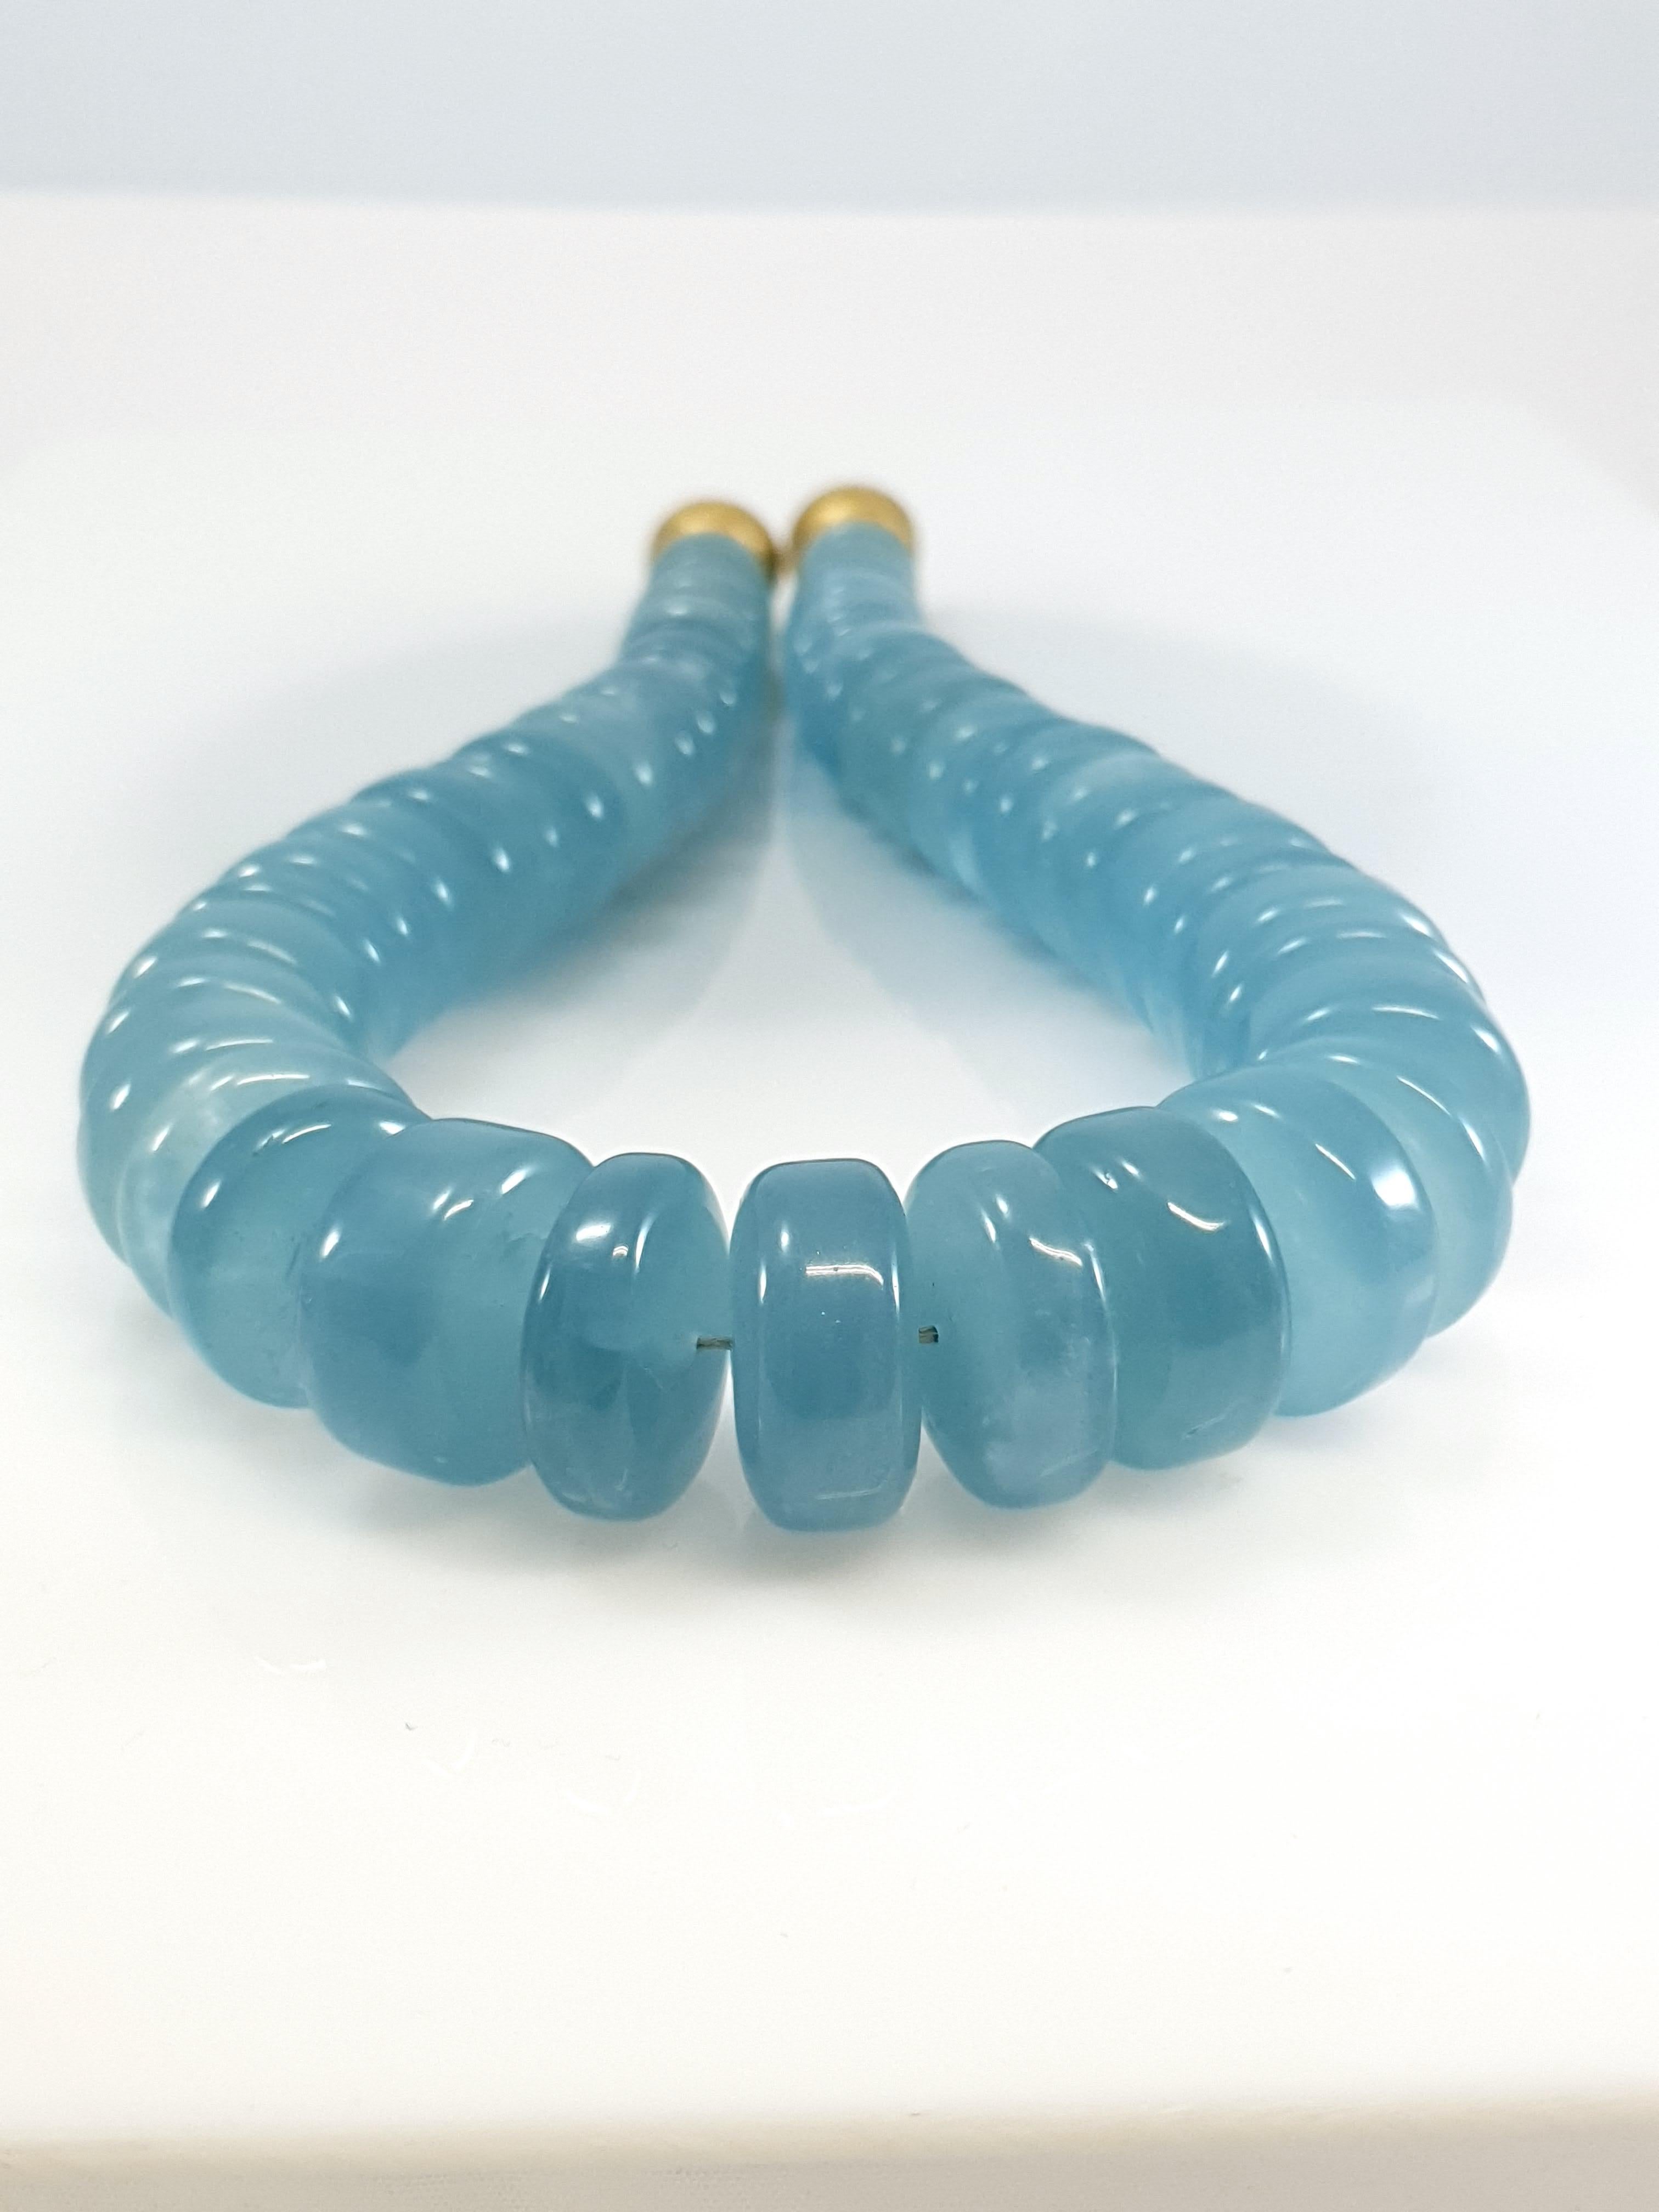 This BIG Sky Blue Aquamarine Rondel Beaded Necklace with 18 Carat Mat Yellow Gold Clasp is totally handmade on German quality standard. The screw clasp is easy to handle and very secure.
Timeless and classic design combined with very big intense